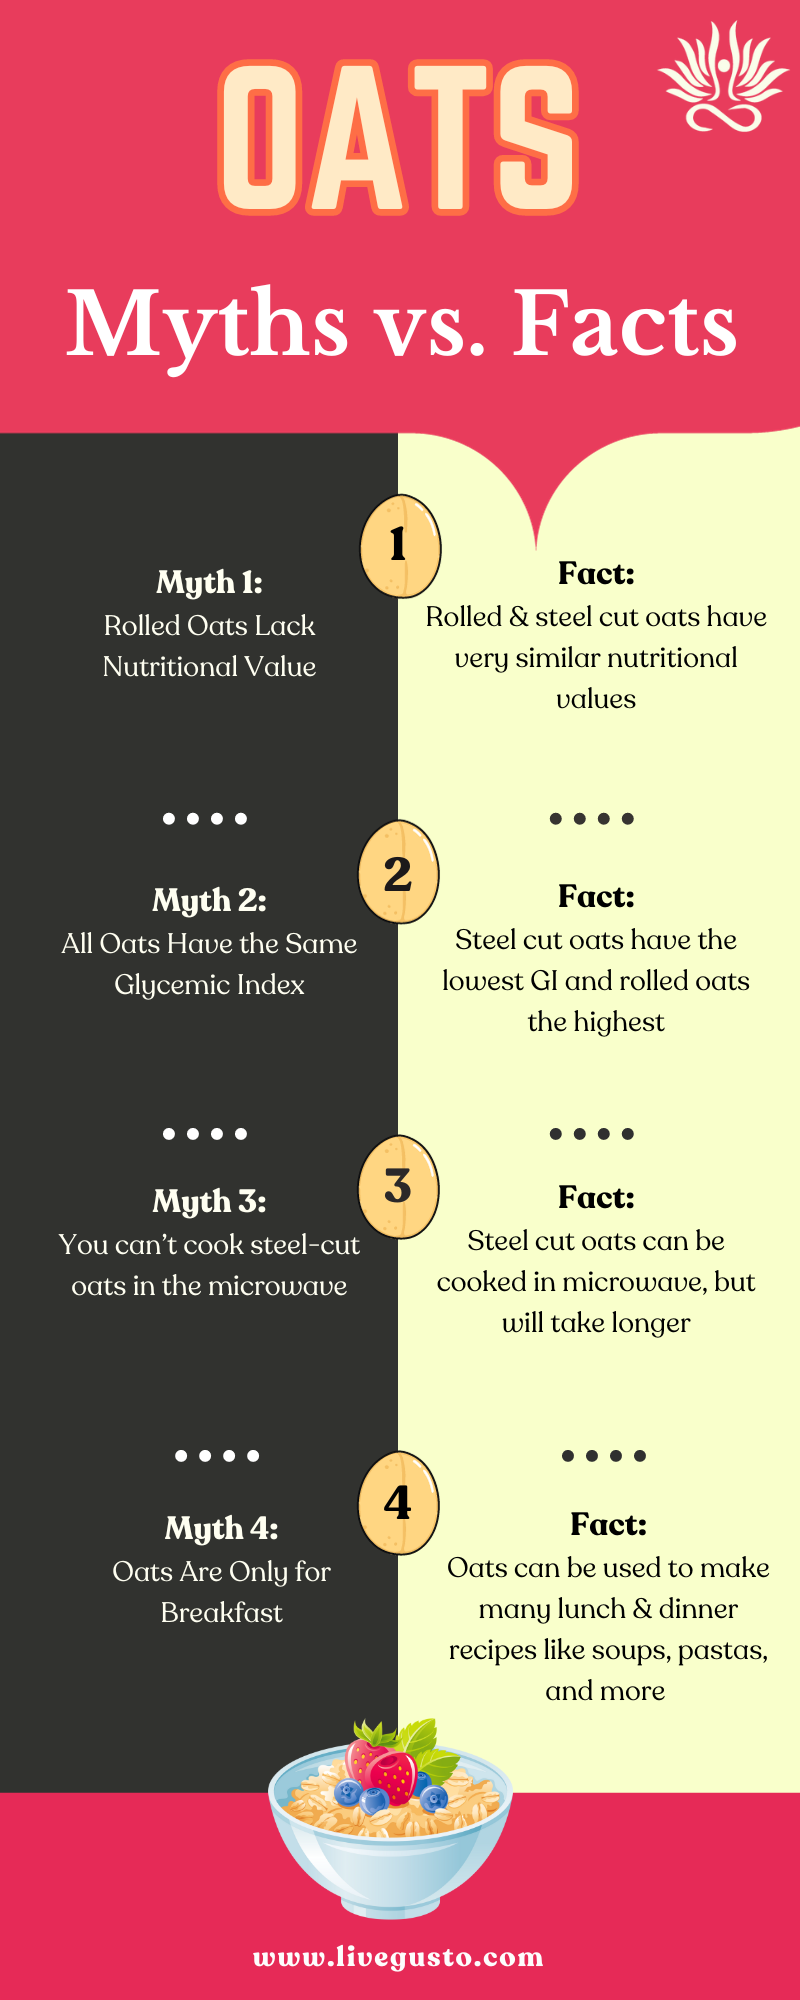 Rolled Oats and Steel Cut Oats - Myths & Facts